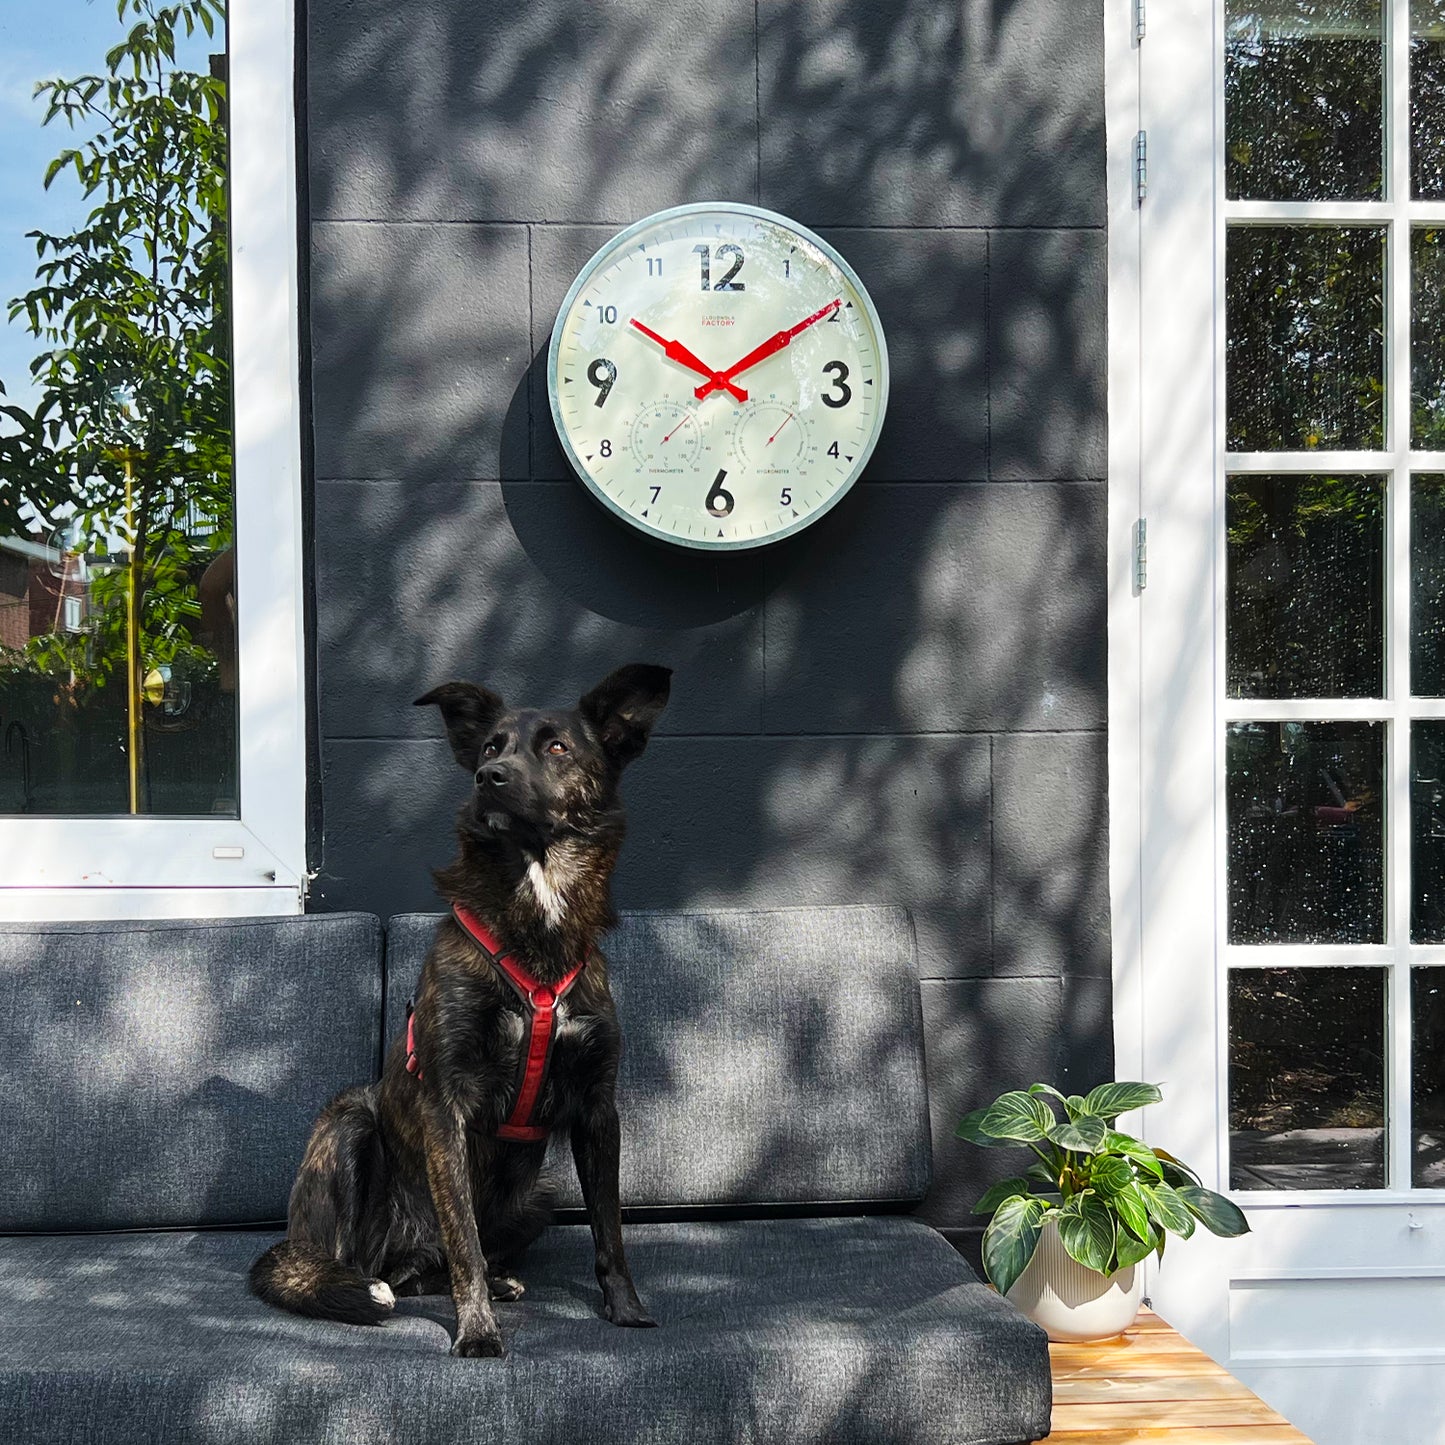 Factory Outdoor XL Zinc Wall Clock - Large-Scale Weather Station with Barometer & Temperature